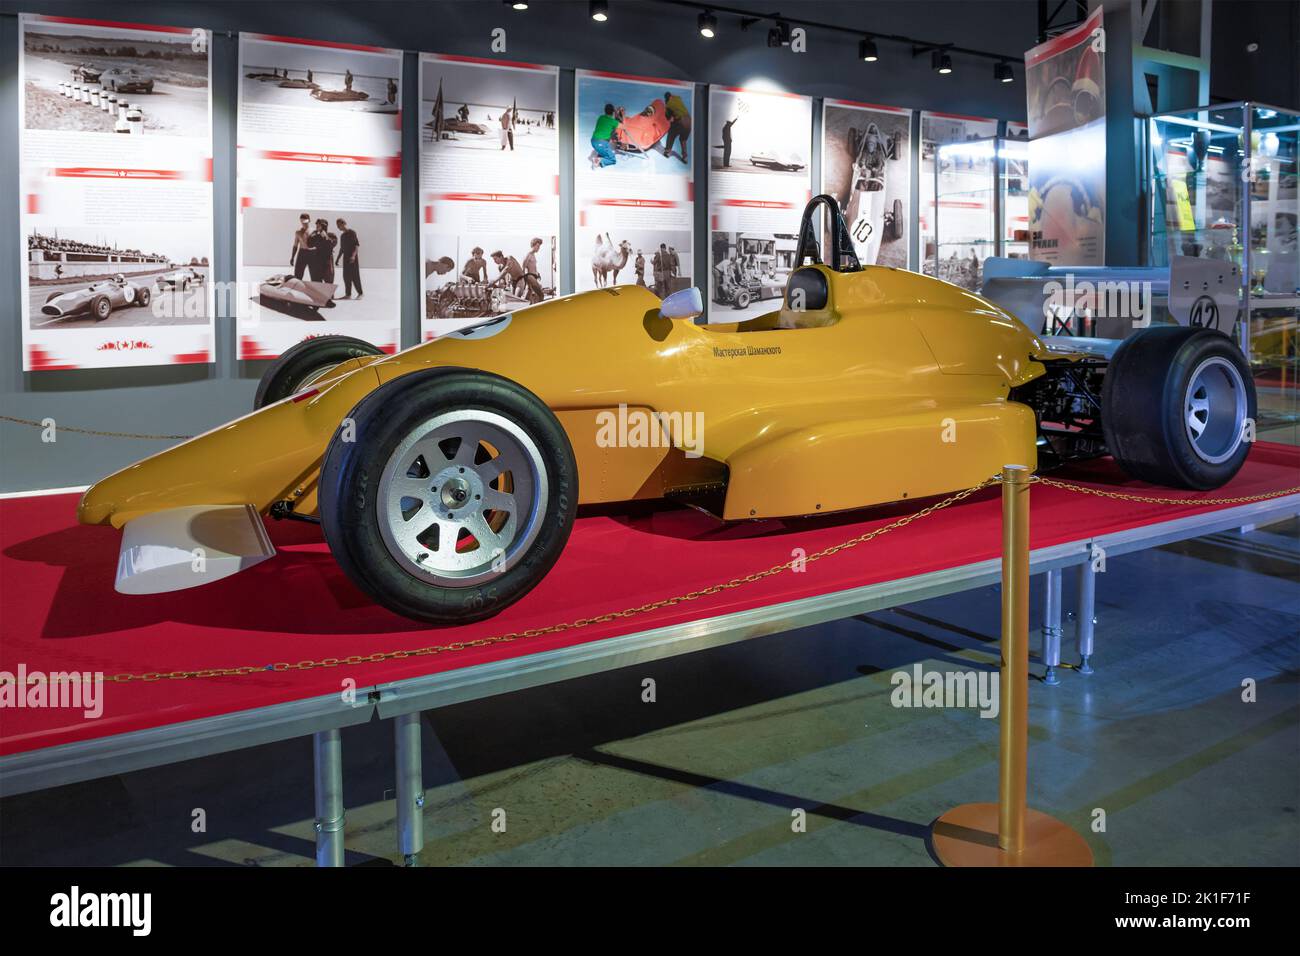 MOSCOW, RUSSIA - AUGUST 17, 2022: Soviet serial racing car of 'Estonia-25'. Exhibition 'Struggle for speed' (Record and racing cars of the USSR) Stock Photo